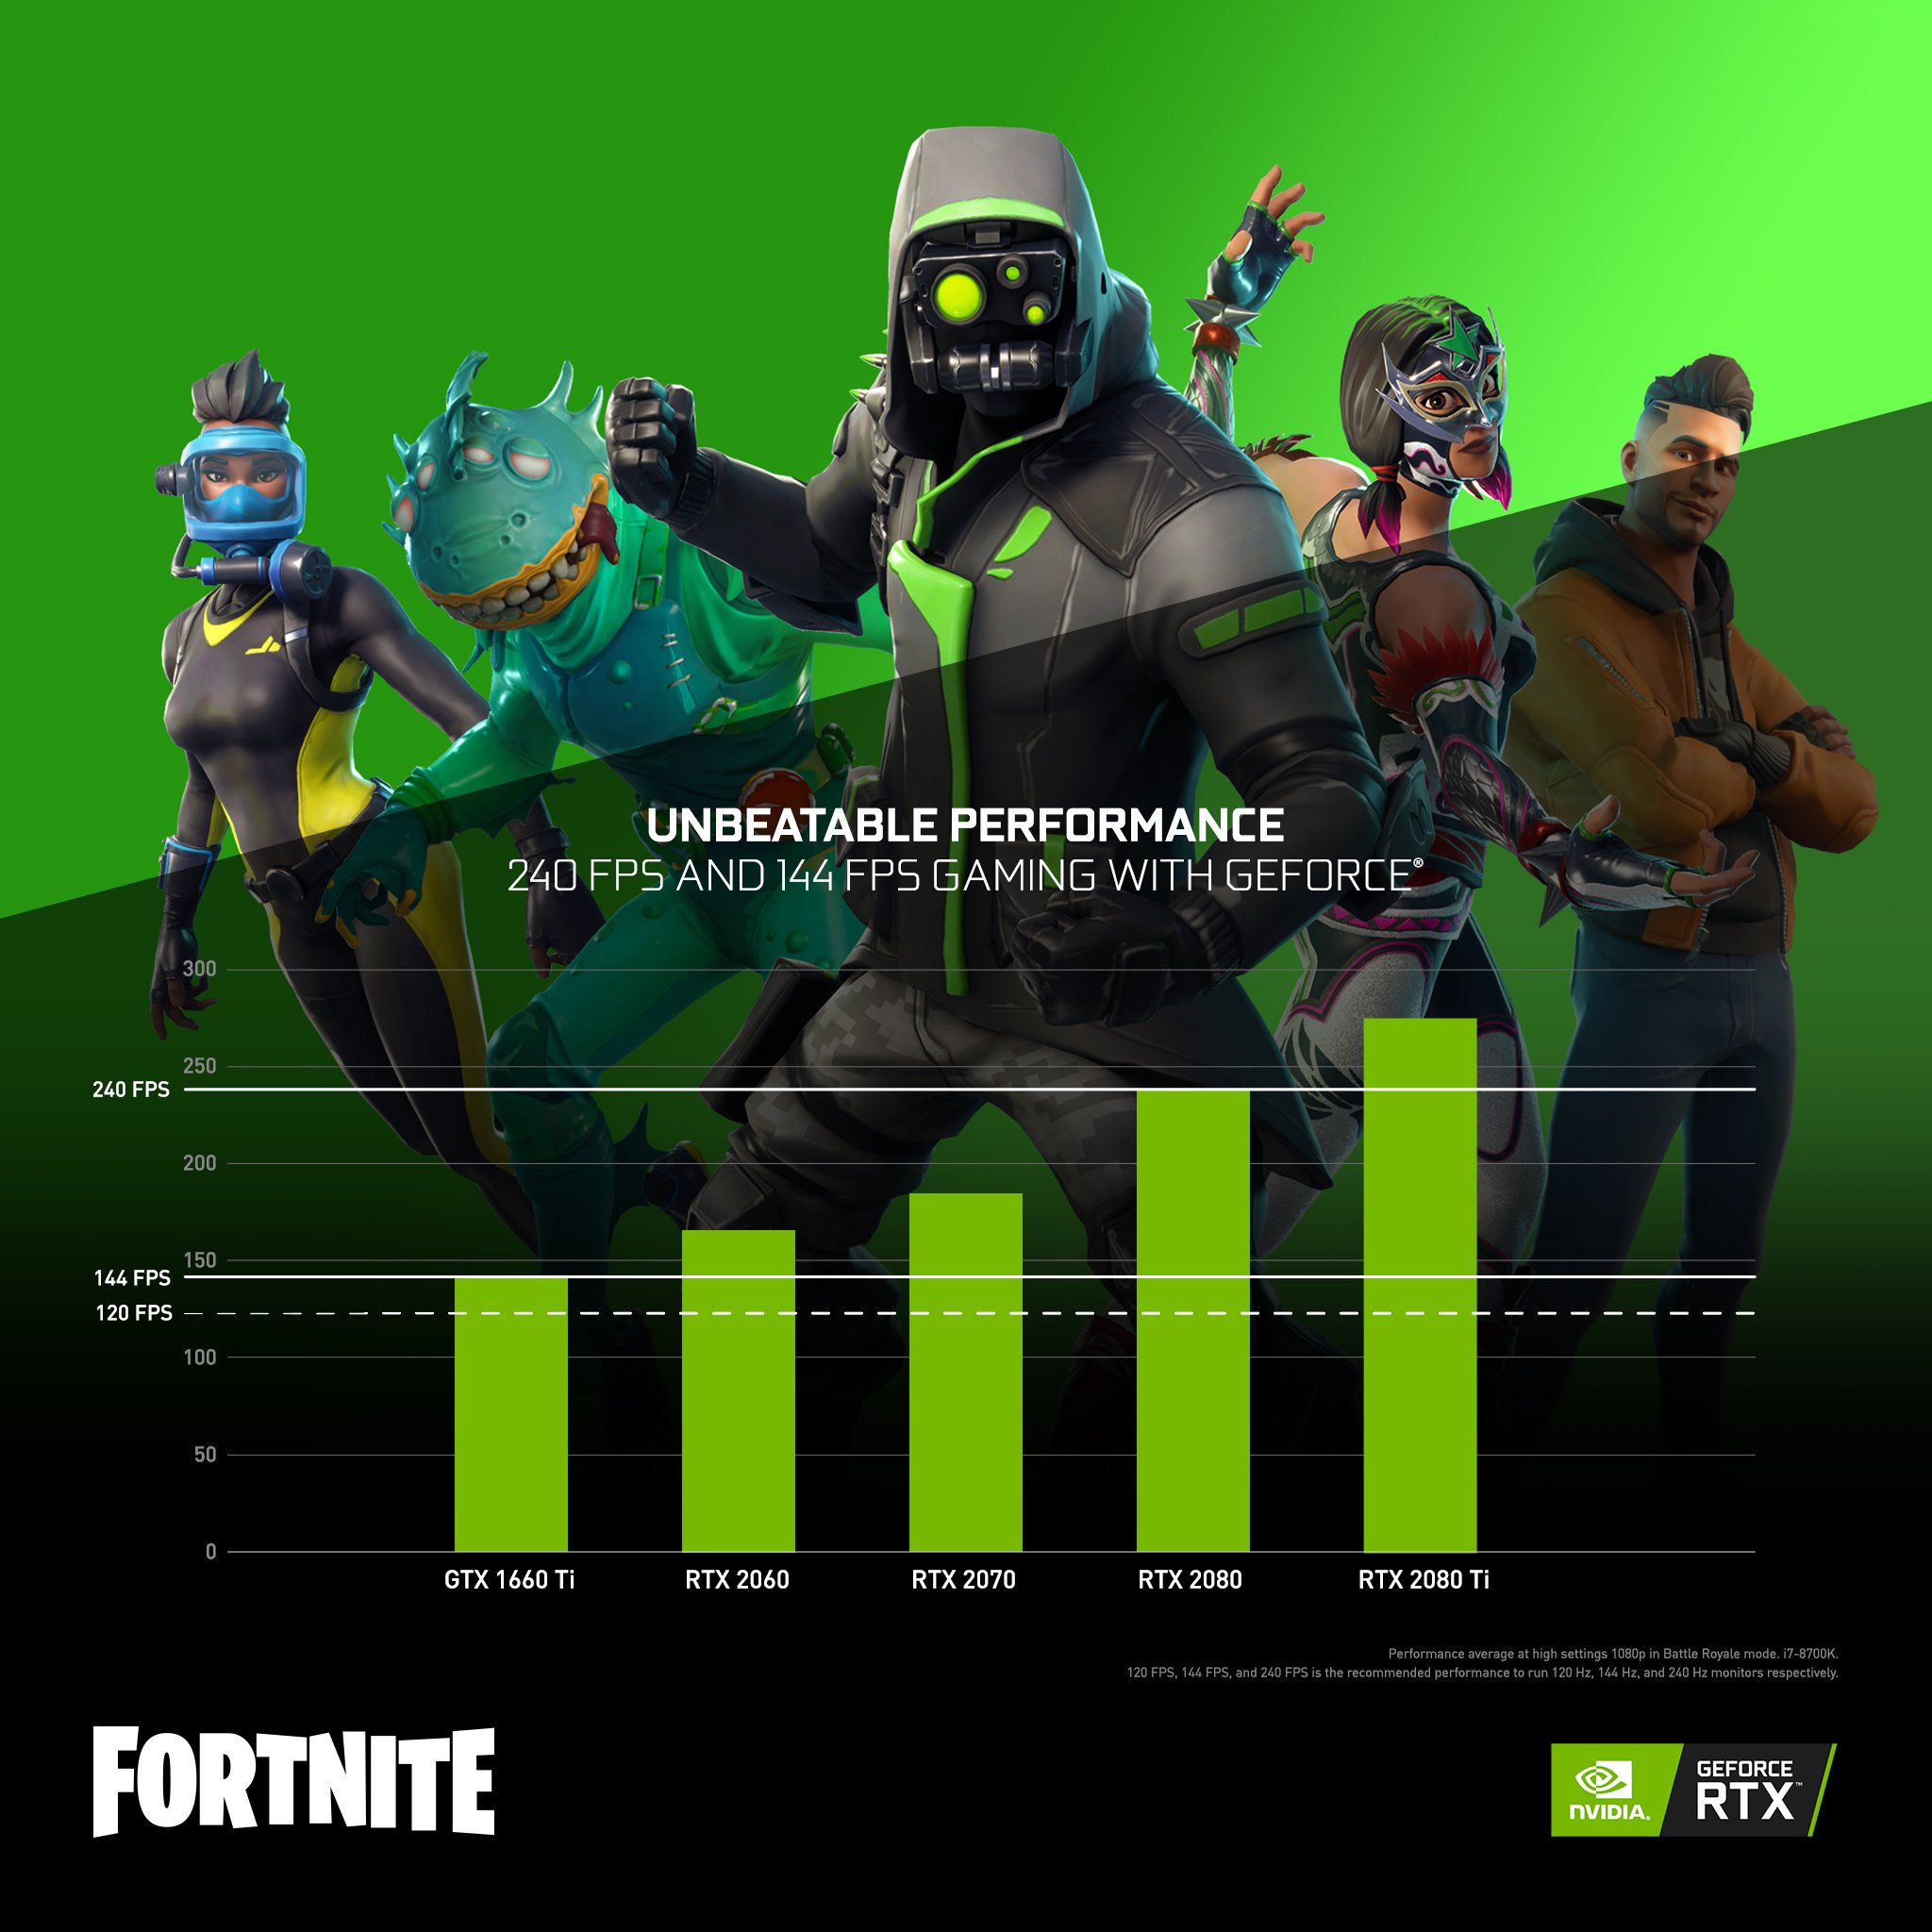 NVIDIA GeForce Twitter: "Fortnite players thrive with FPS. Achieve smooth 144 FPS and beyond with GeForce. Learn more → https://t.co/XbO3heBhVR https://t.co/zlyhRnBbhN" / Twitter